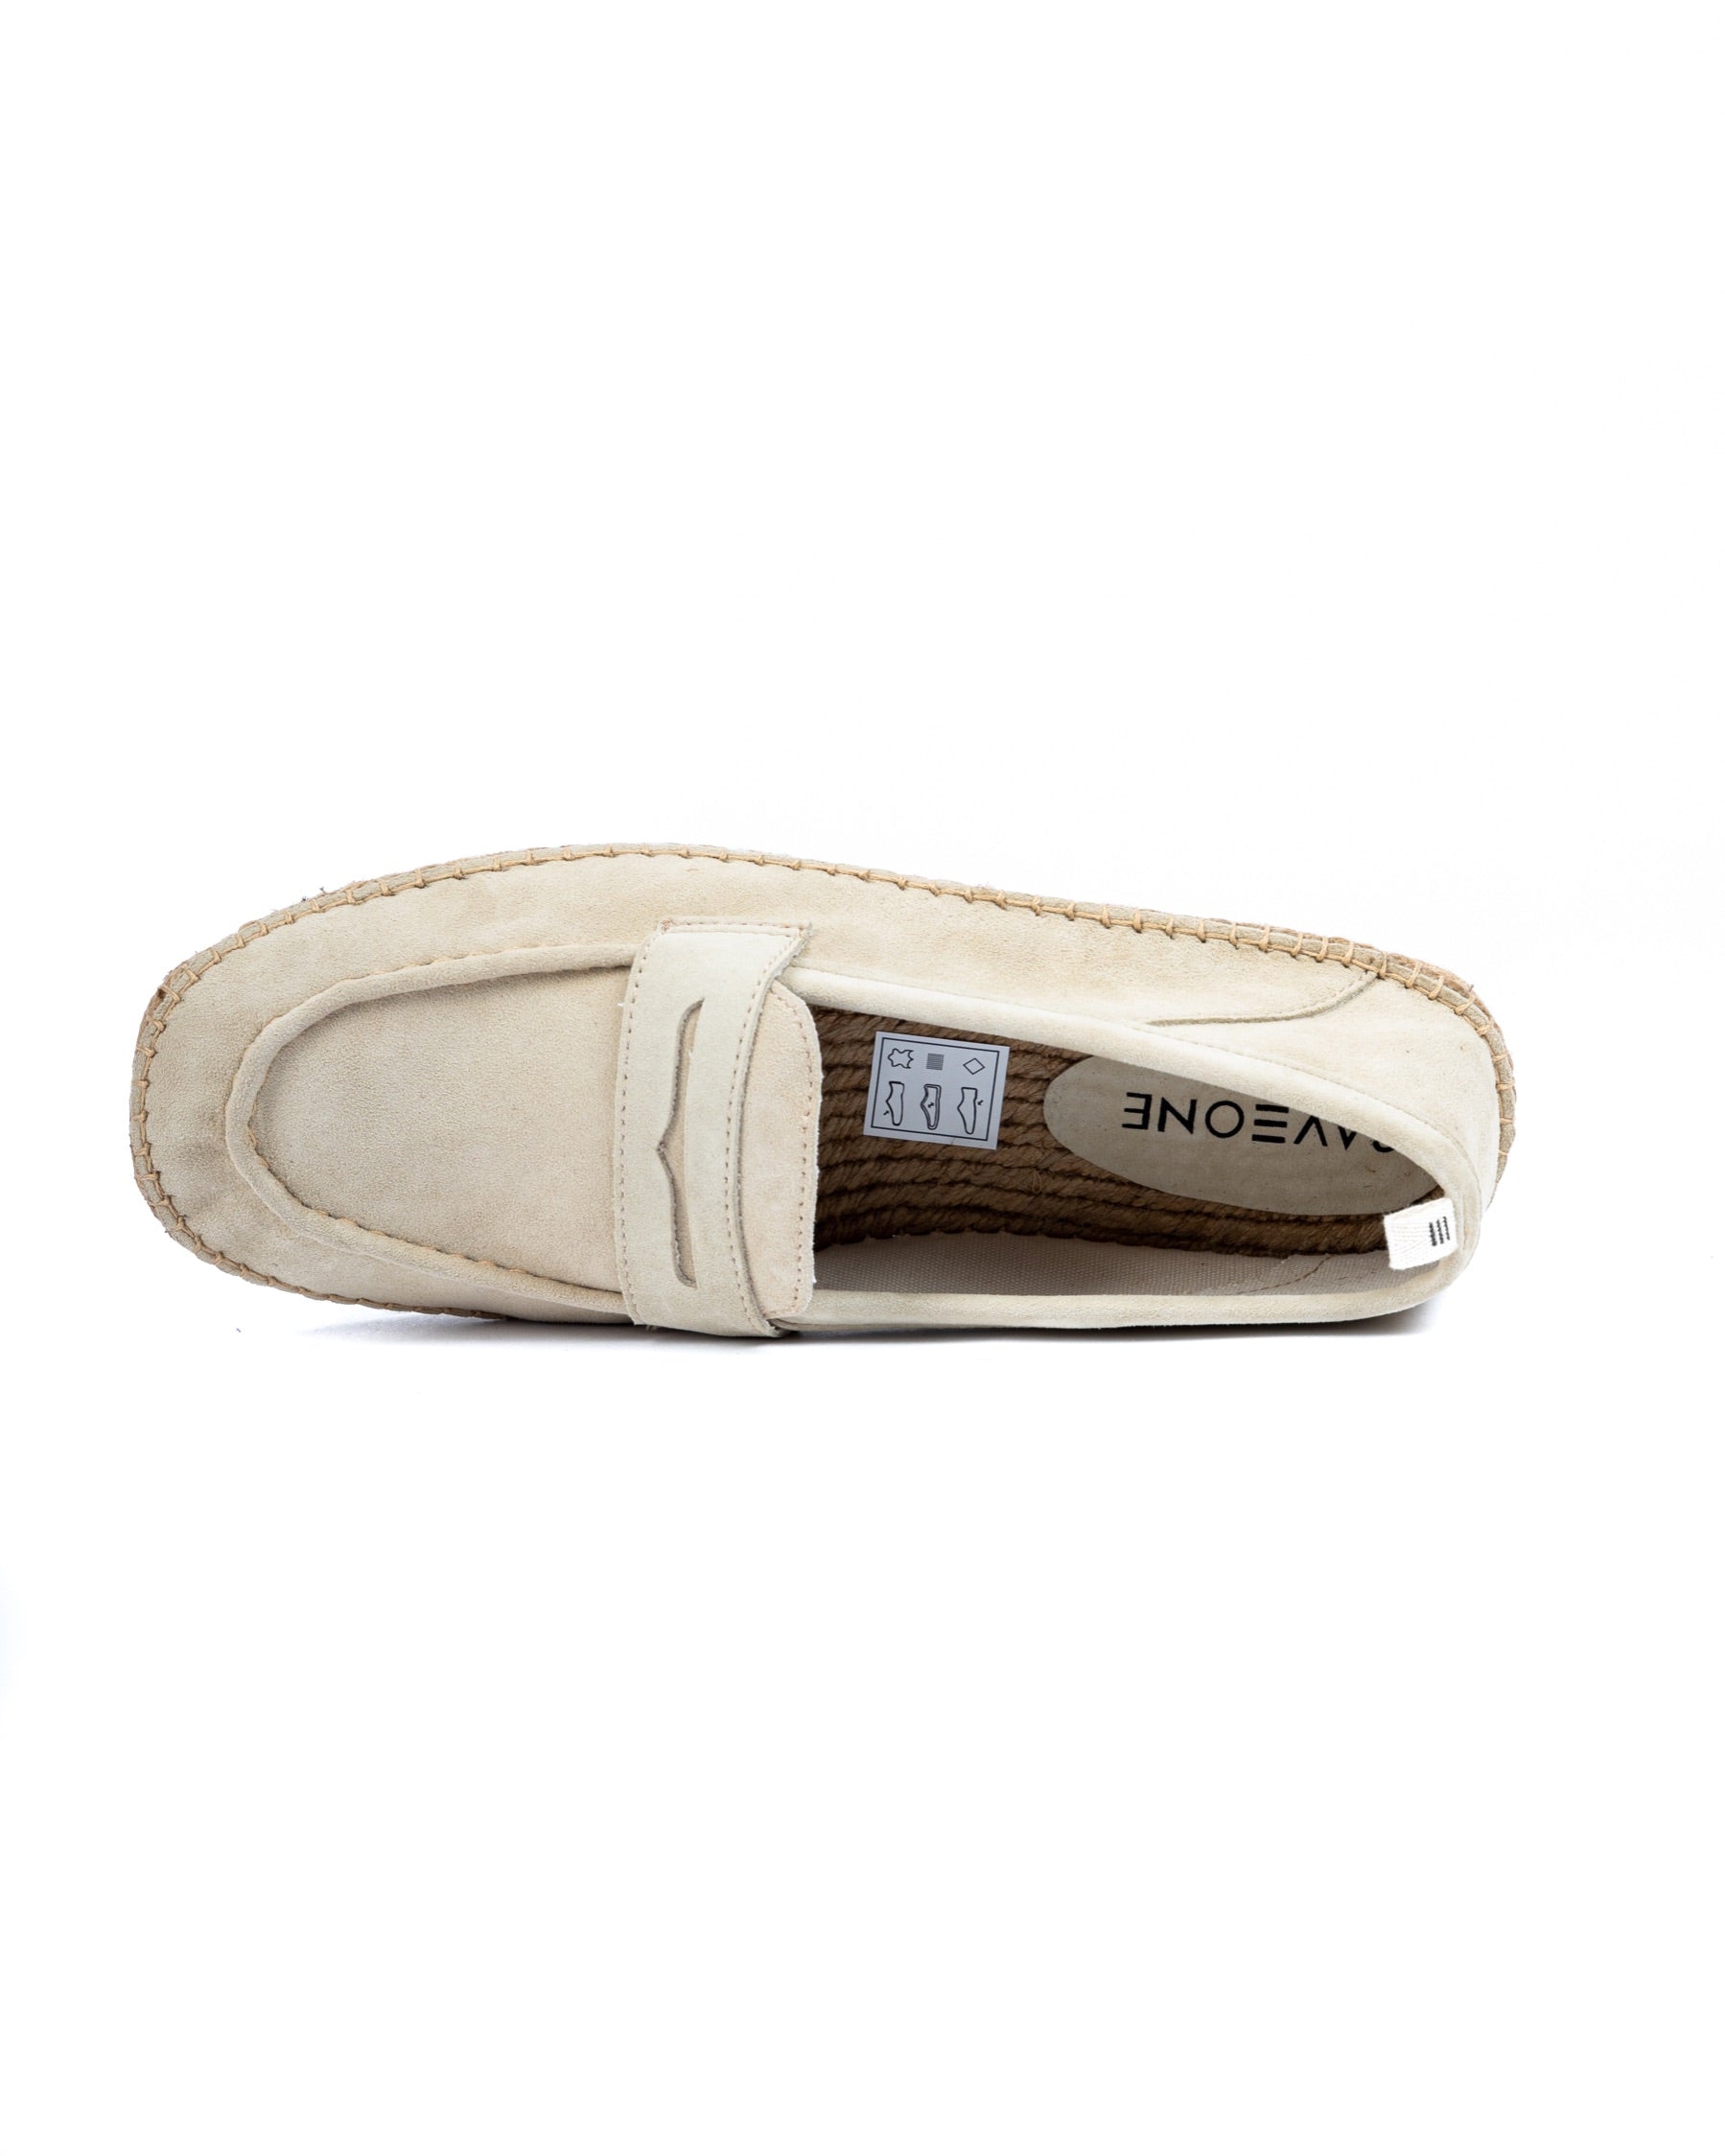 Roma - cream suede moccasin with rope sole